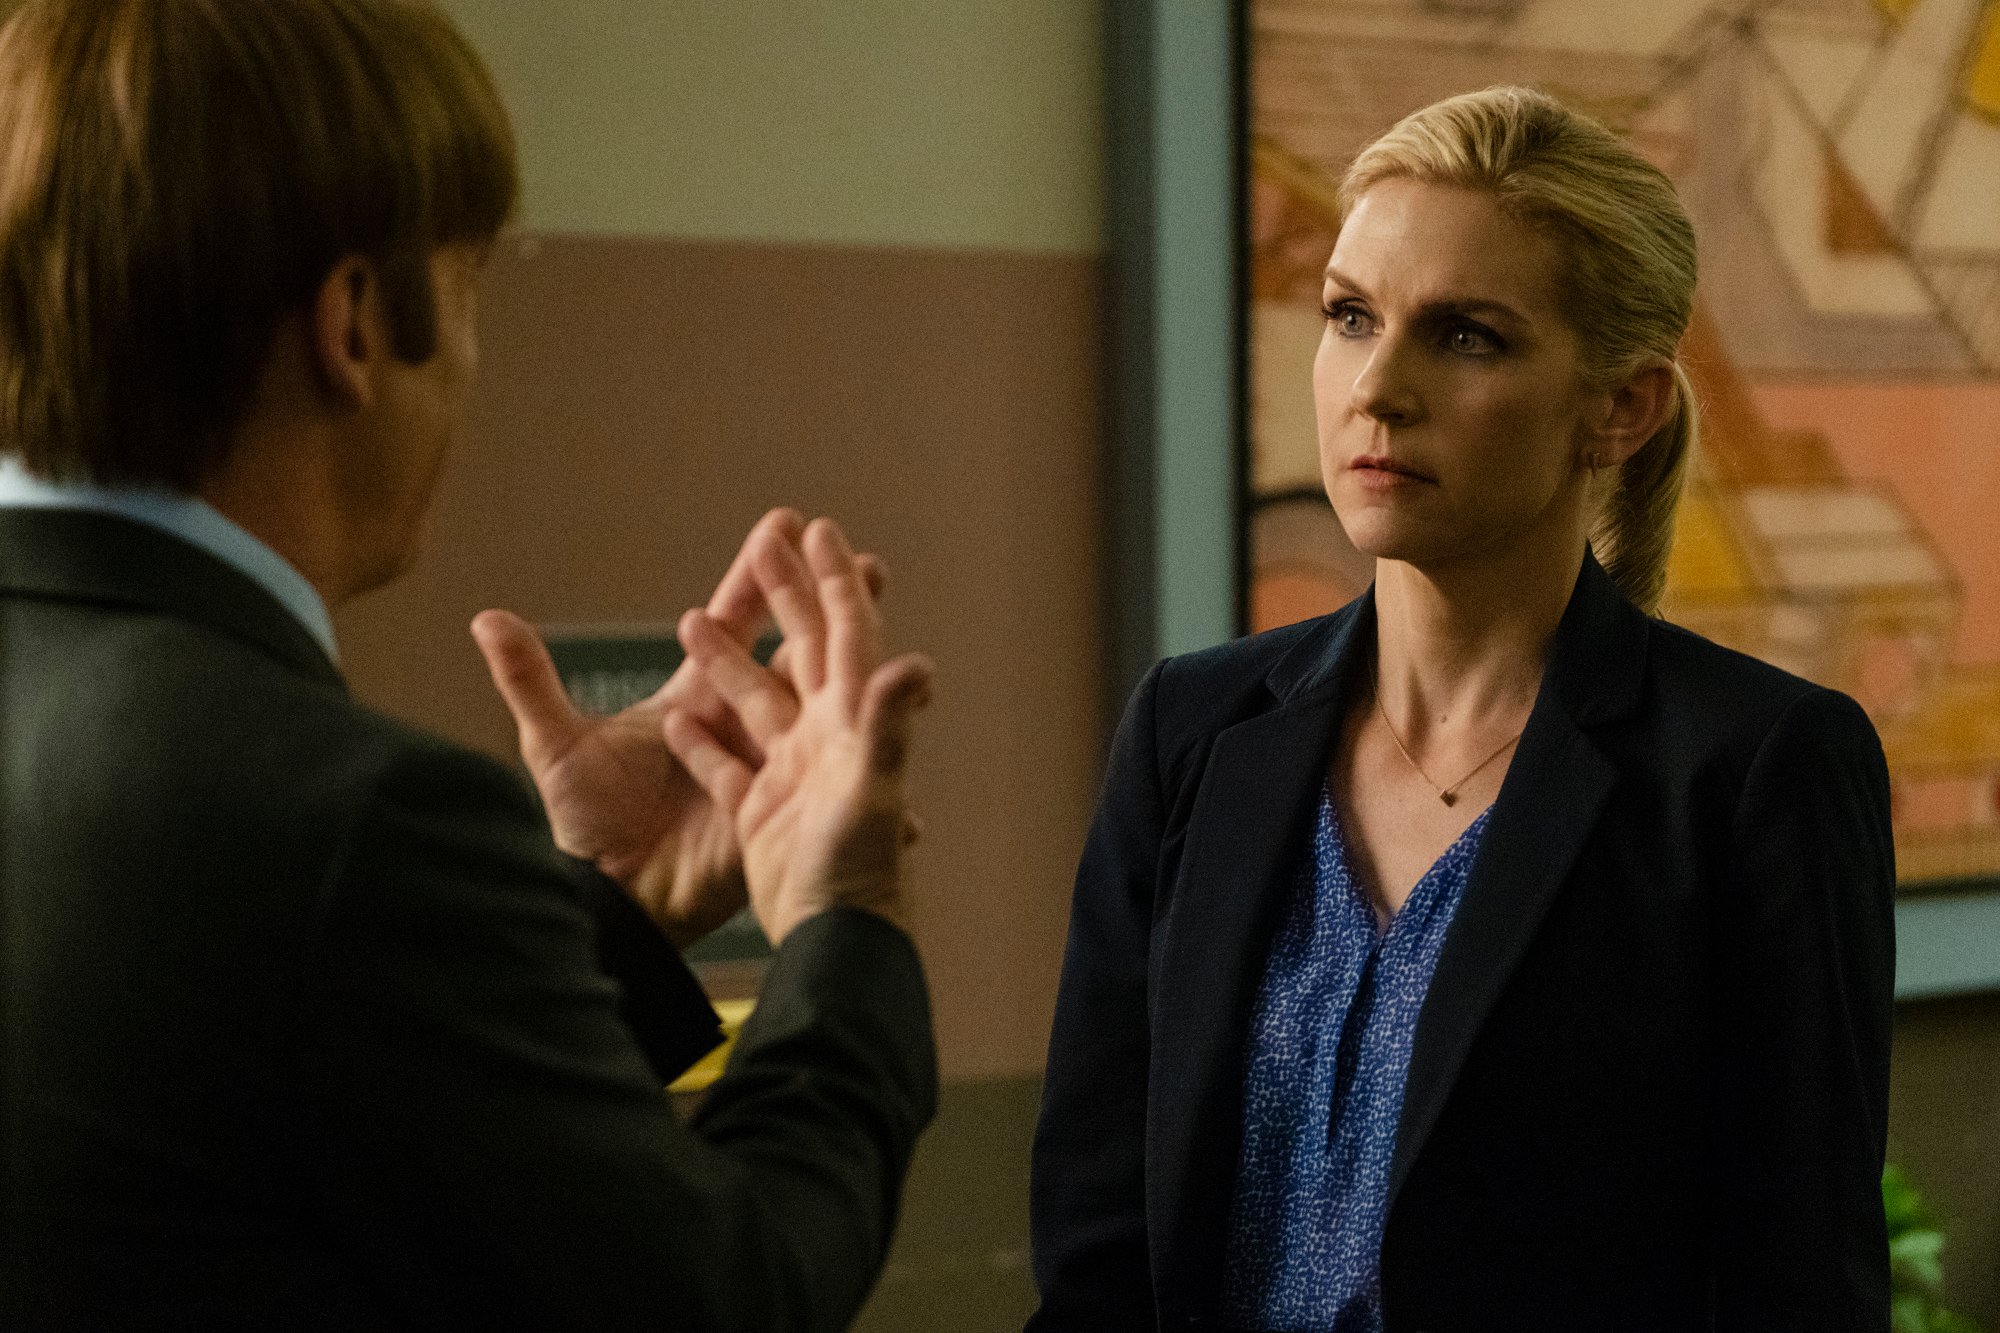 Rhea Seehorn as Kim Wexler in 'Better Call Saul' - She's wearing a blue shirt and black blazer and speaking to Jimmy, whose back is toward the camera